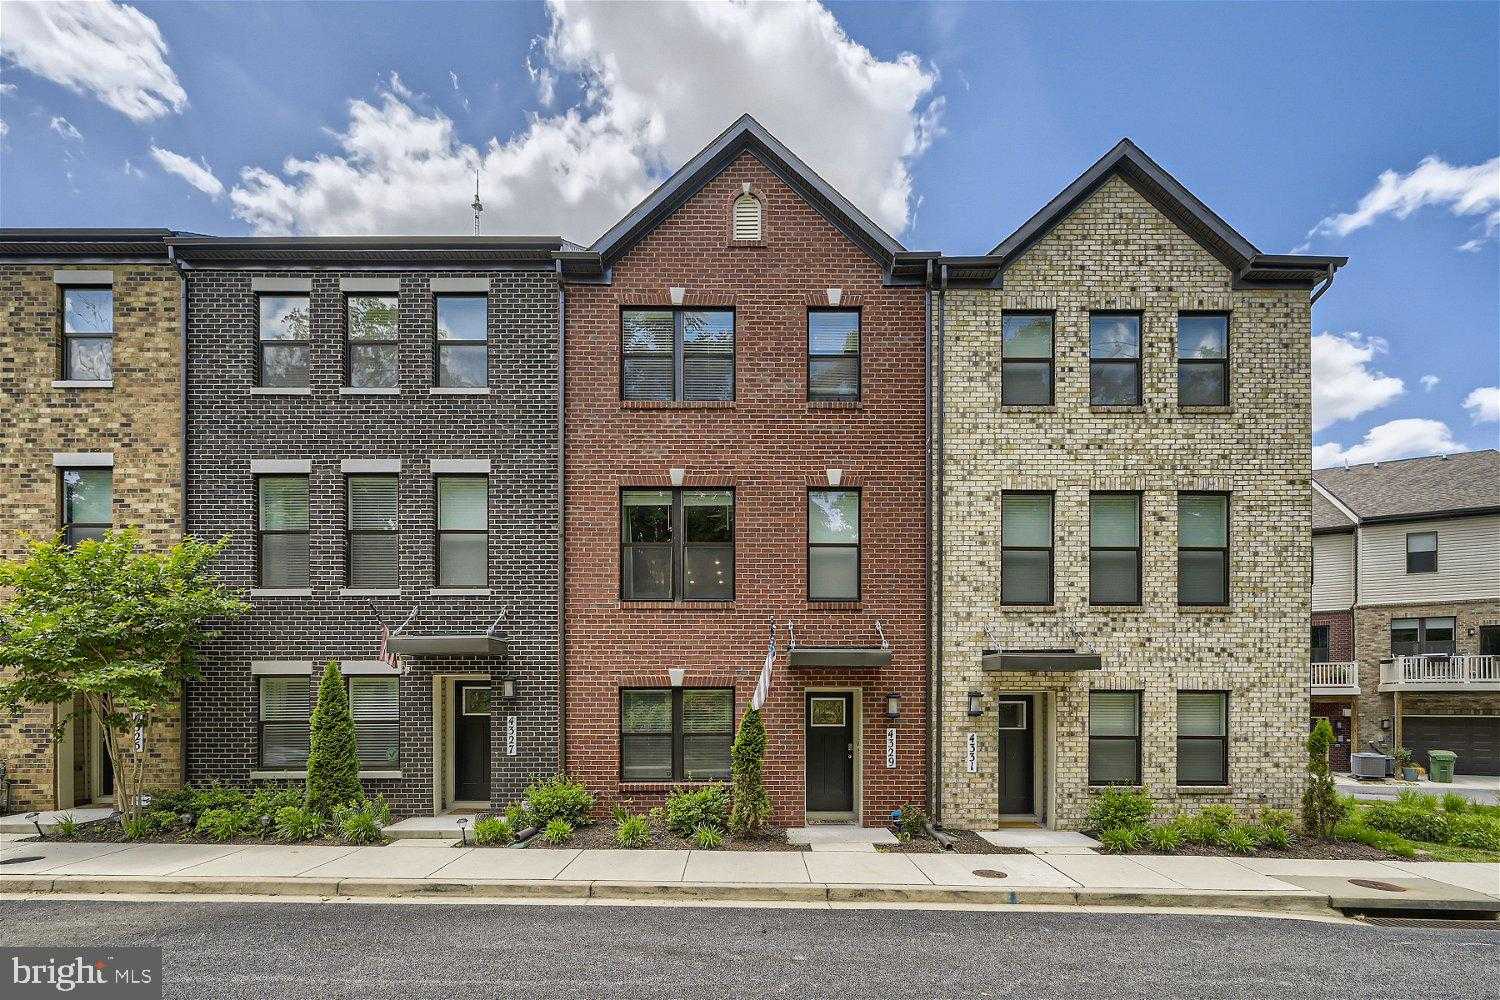 View BALTIMORE, MD 21211 townhome